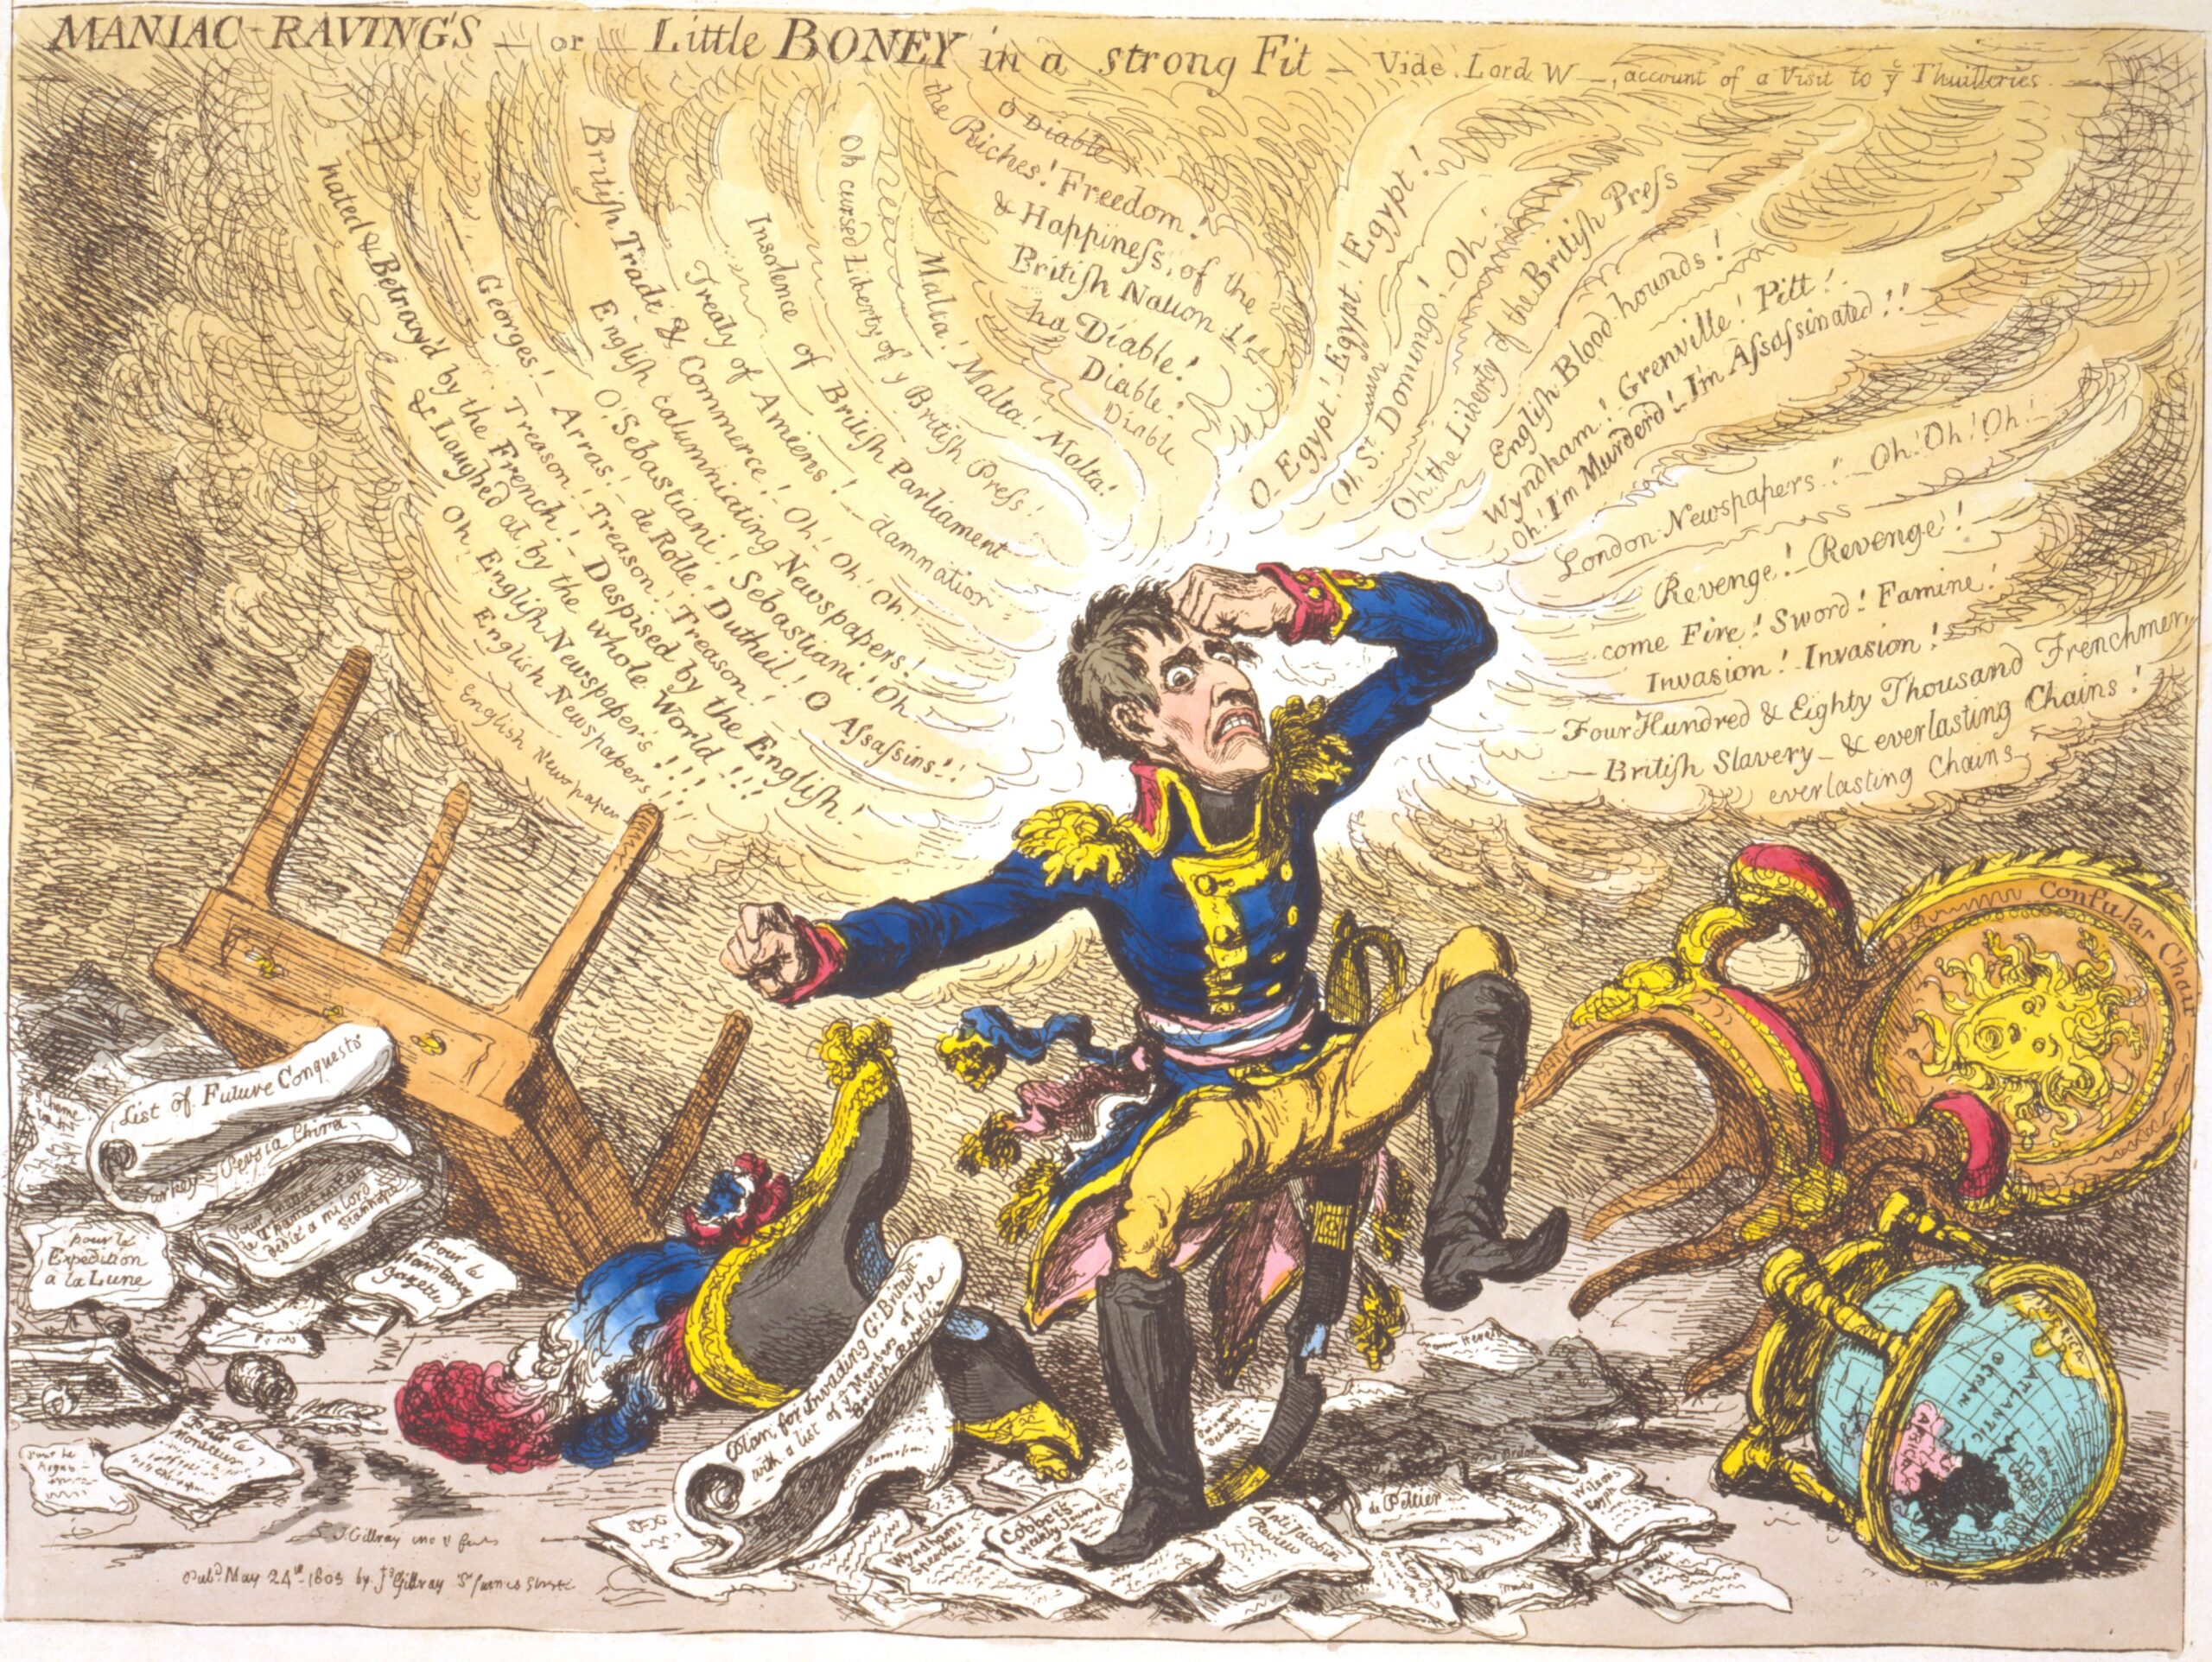 James Gillray, Maniac-raving's or Little Boney in a strong fit, 1803, etching, hand-colored